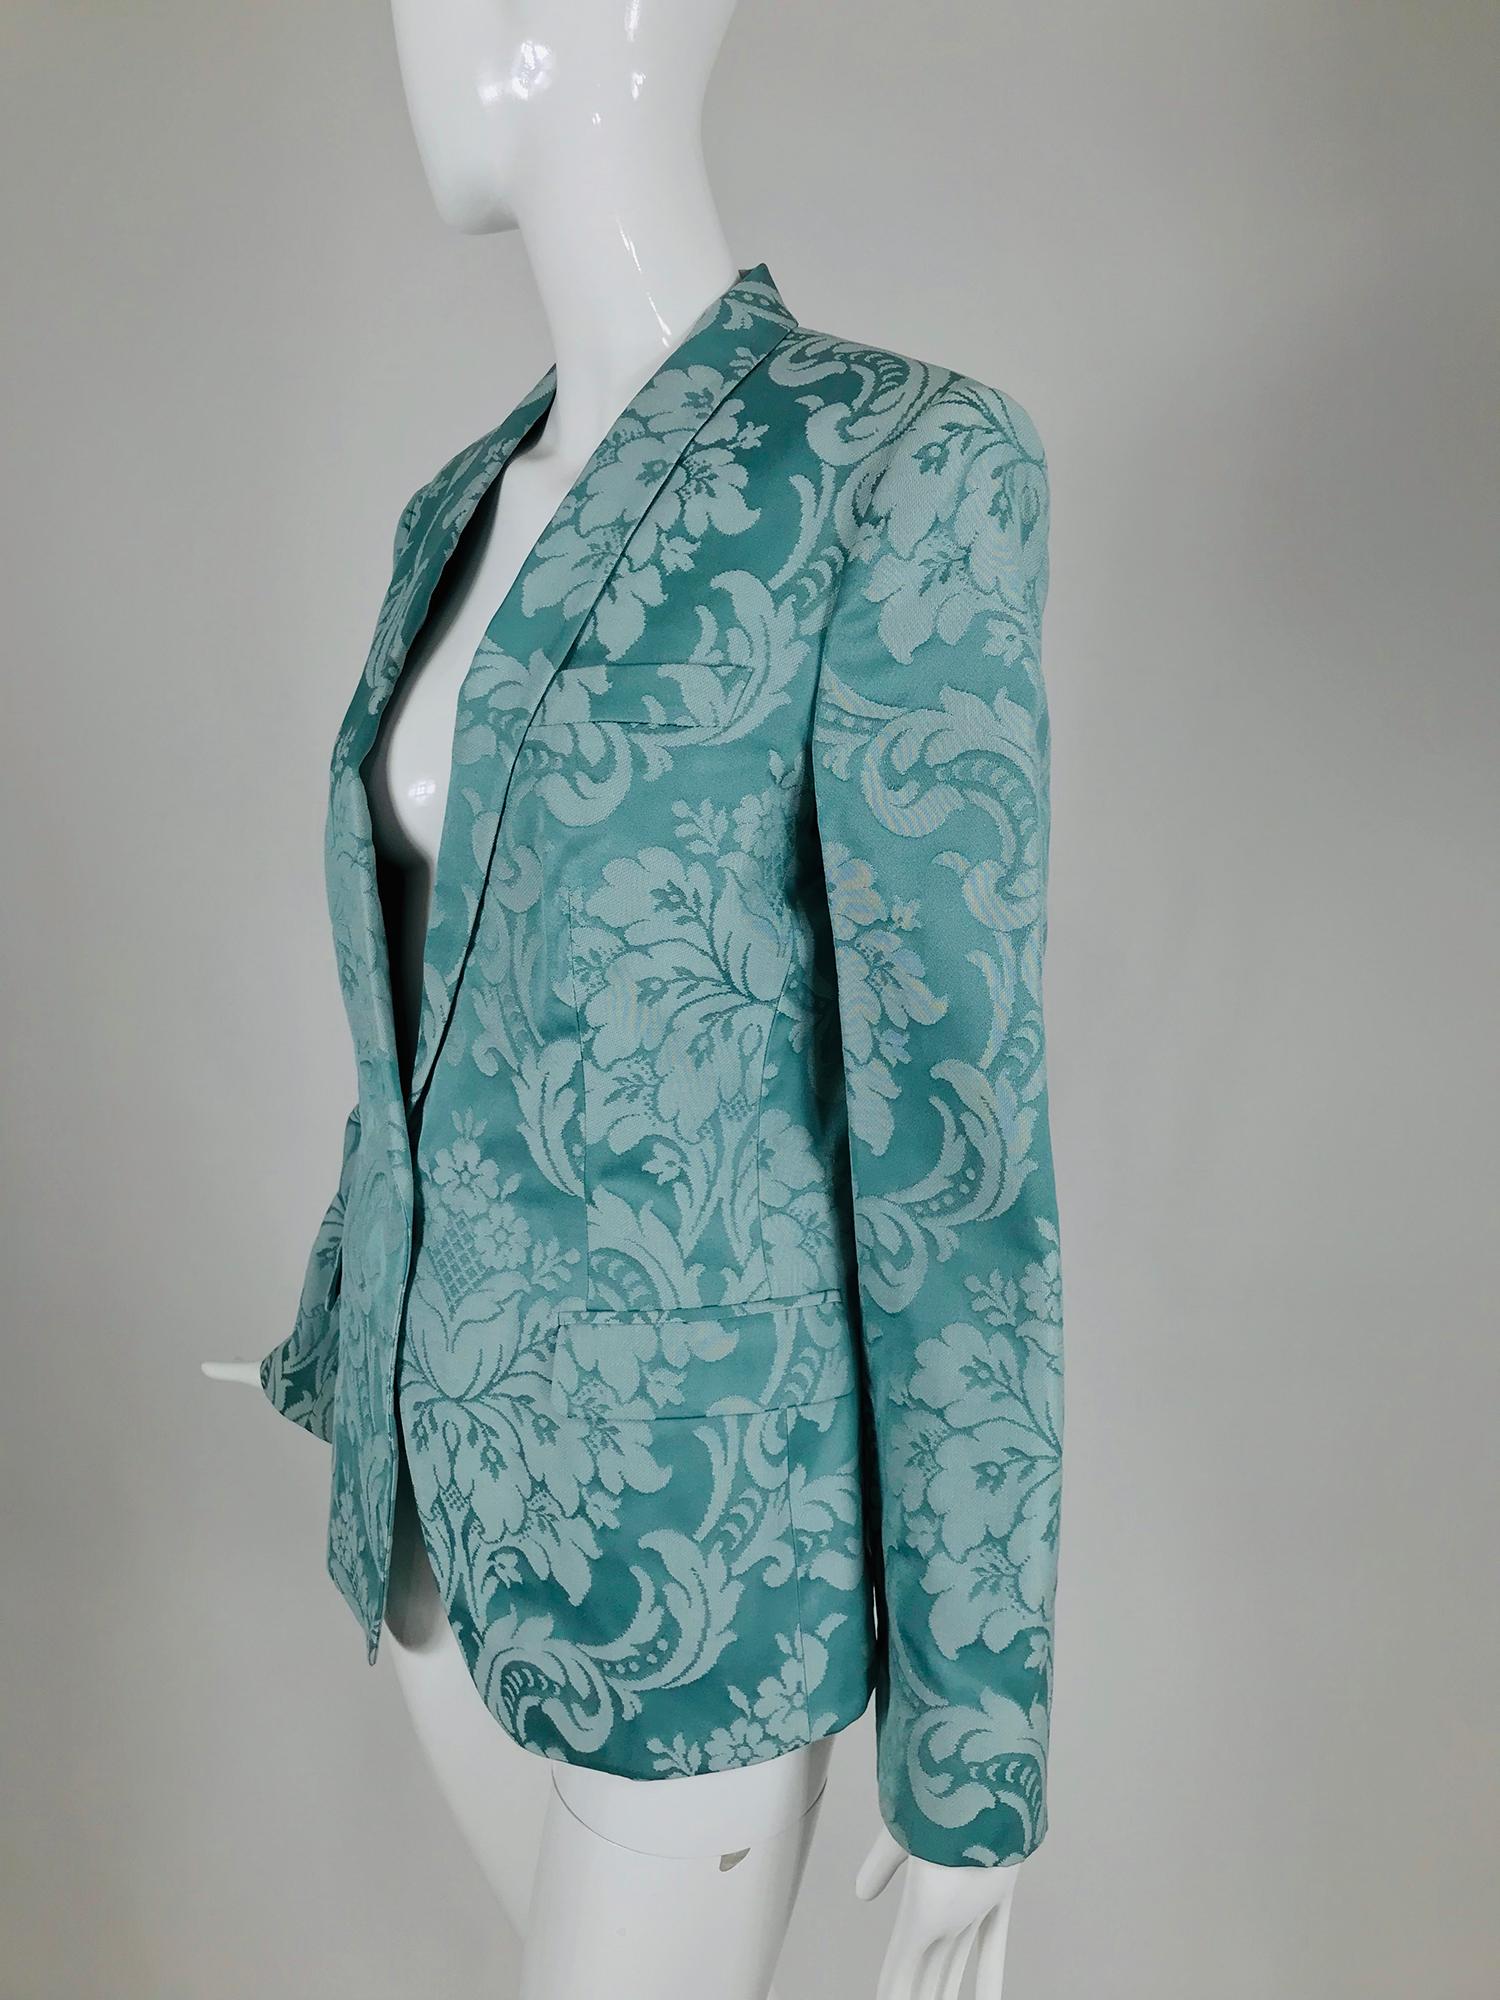 Dolce and Gabbana aqua satin jacquard brocade jacket. Single breasted, shawl collar jacket with long sleeves is fitted through the waist. The jacket has a center back hem vent and is lined inside at the shoulders and fronts, all seams are taped.